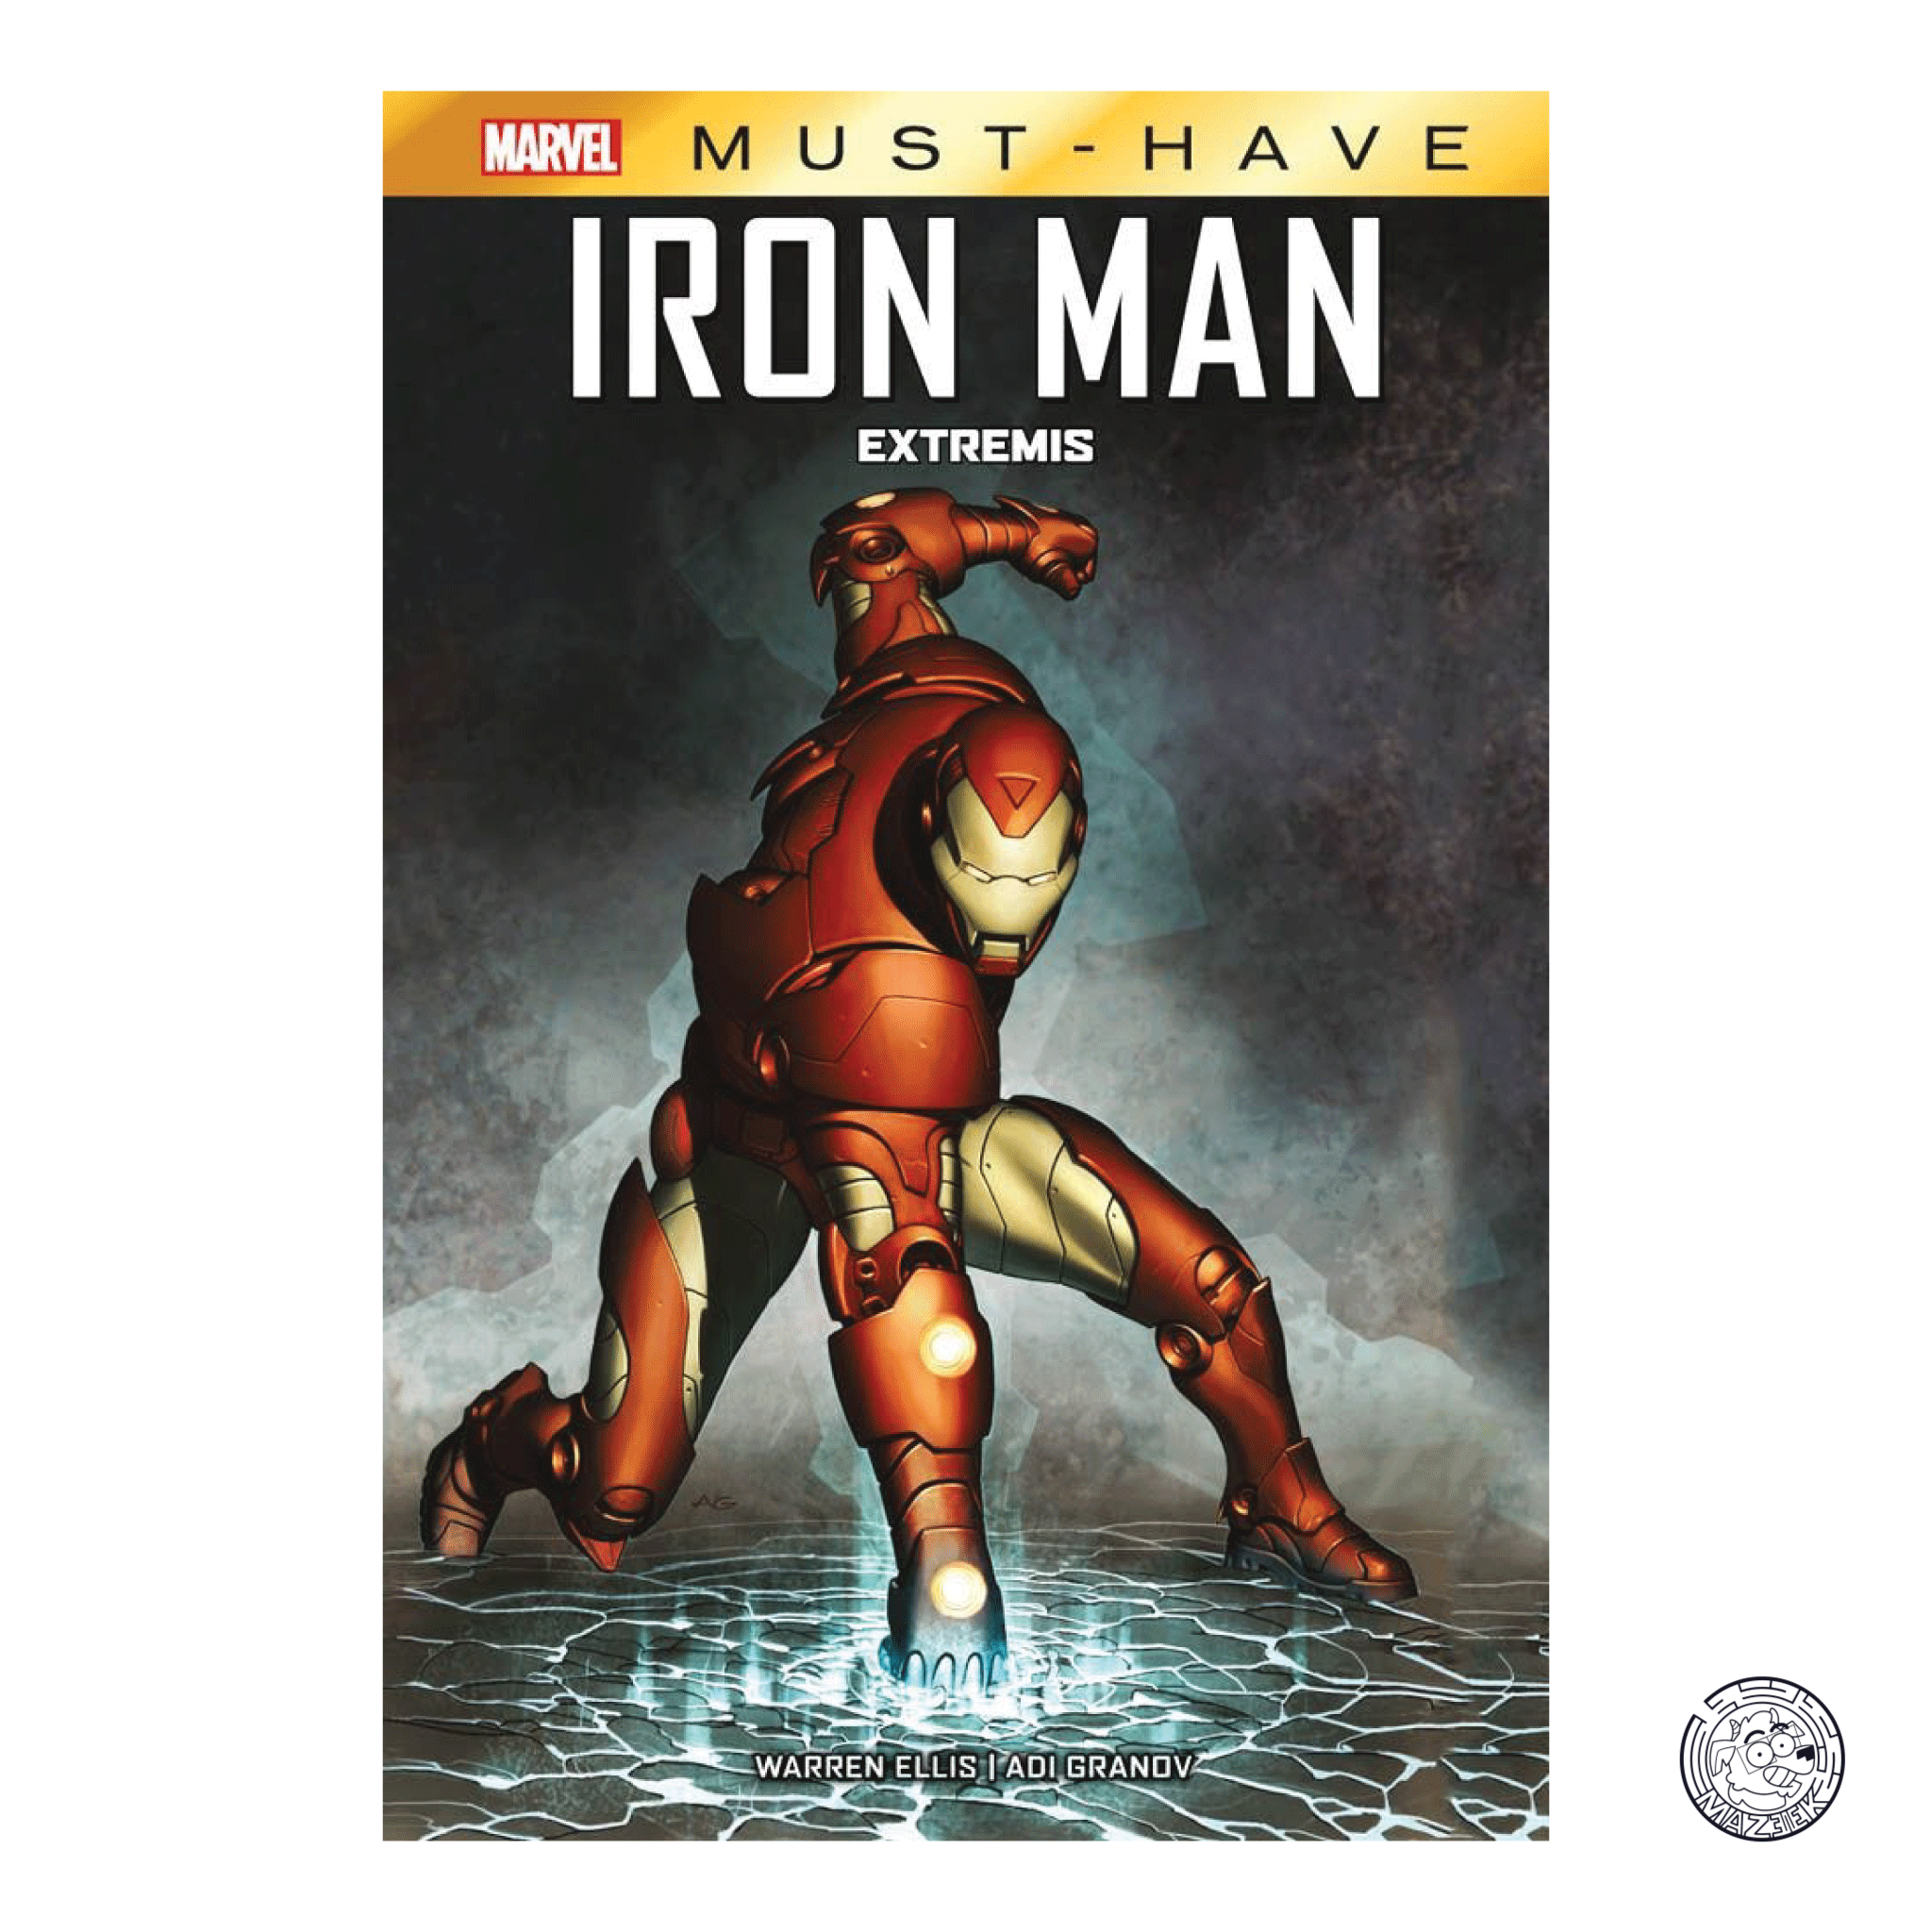 Marvel Must have Iron Man Extremis